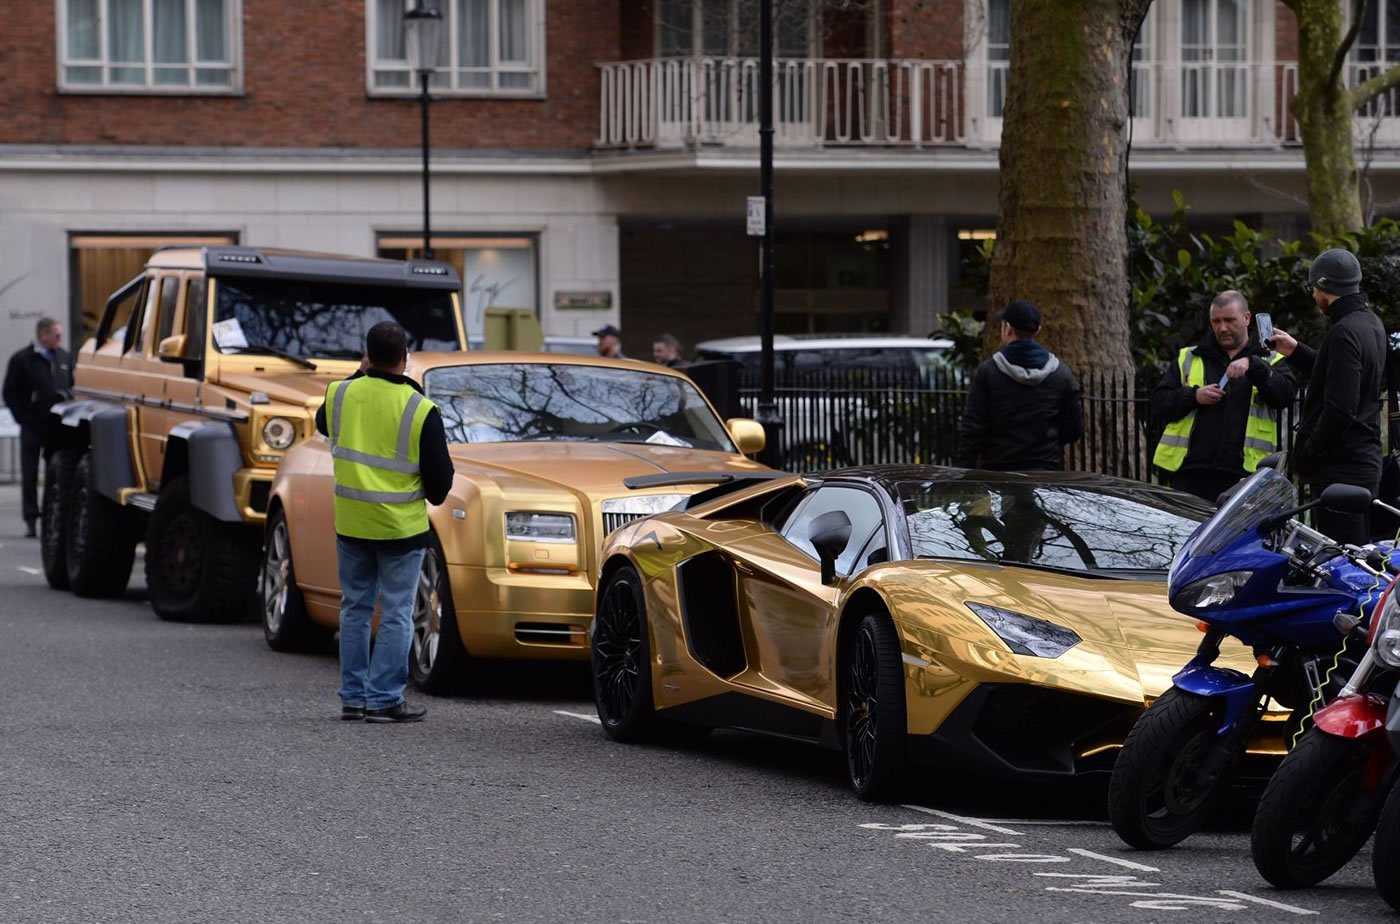 A Saudi who flew into UK with gold supercars walks away with parking tickets - Luxurylaunches